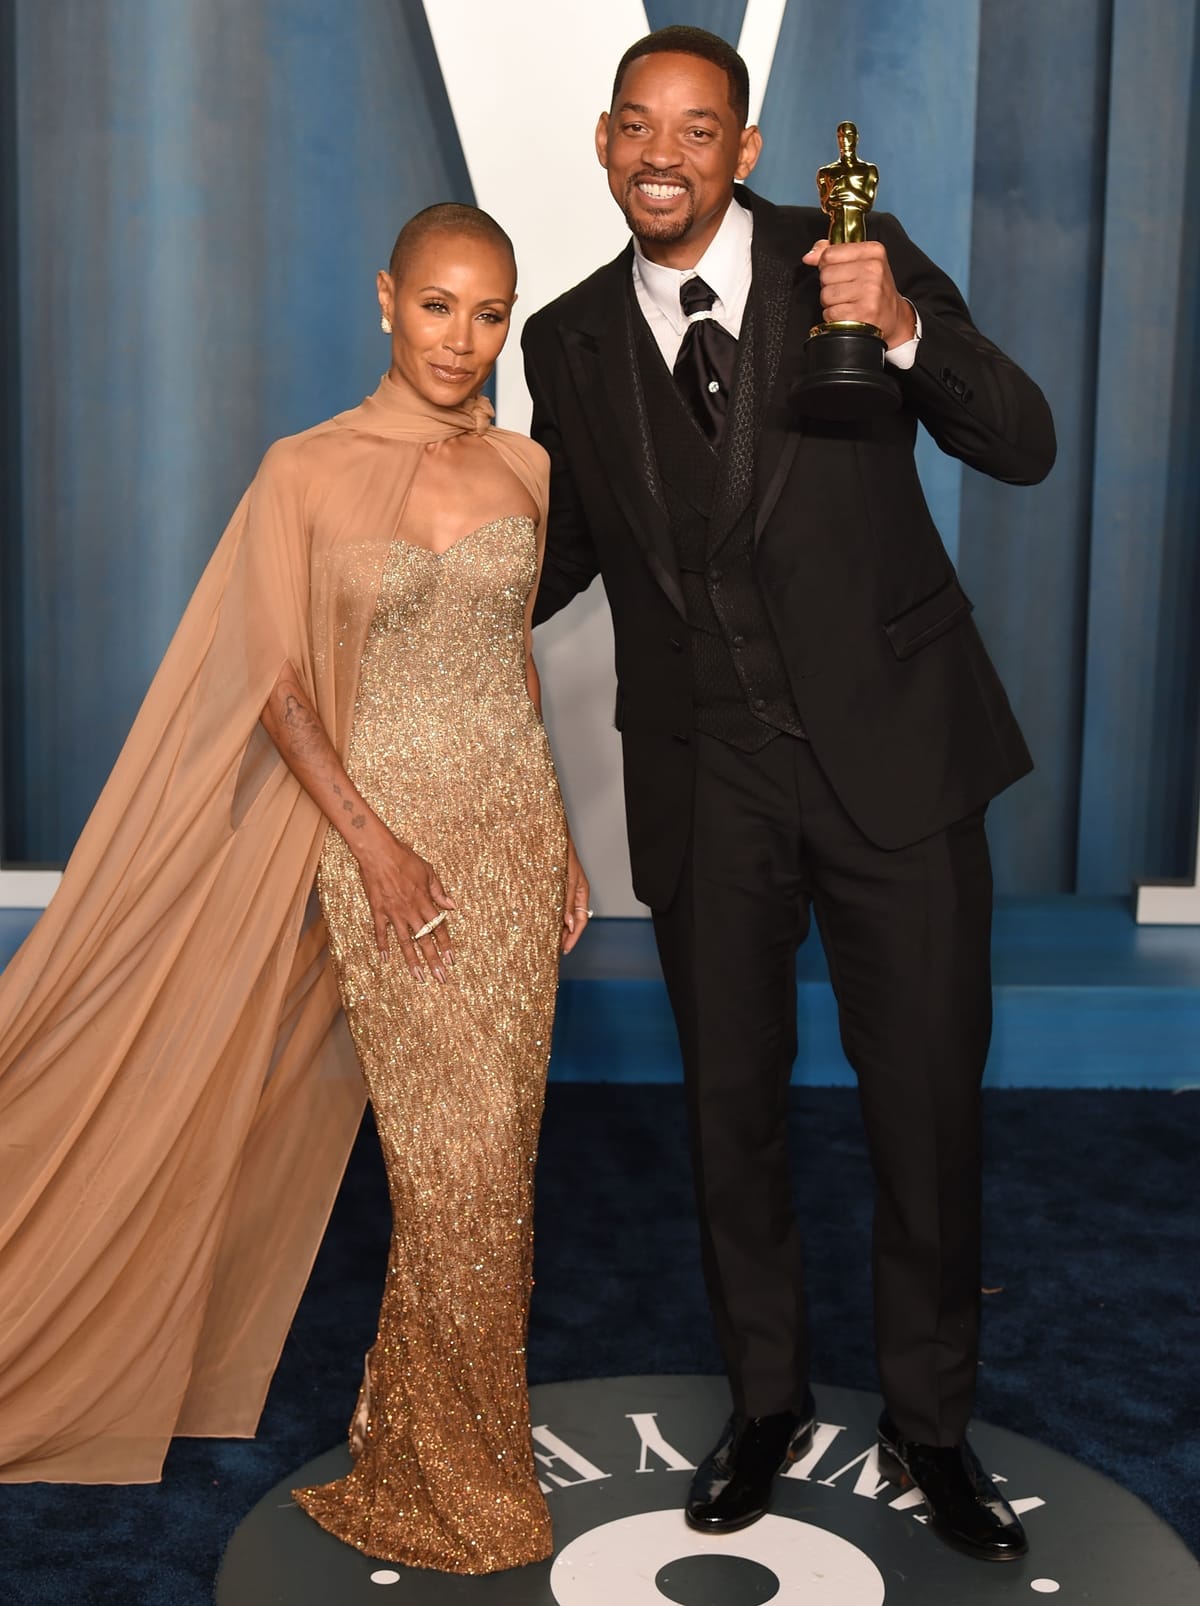 Jada Pinkett Smith in a strapless Dolce & Gabbana dress covered with Swarovski crystals and Will Smith in a Dolce & Gabbana mohair wool tuxedo